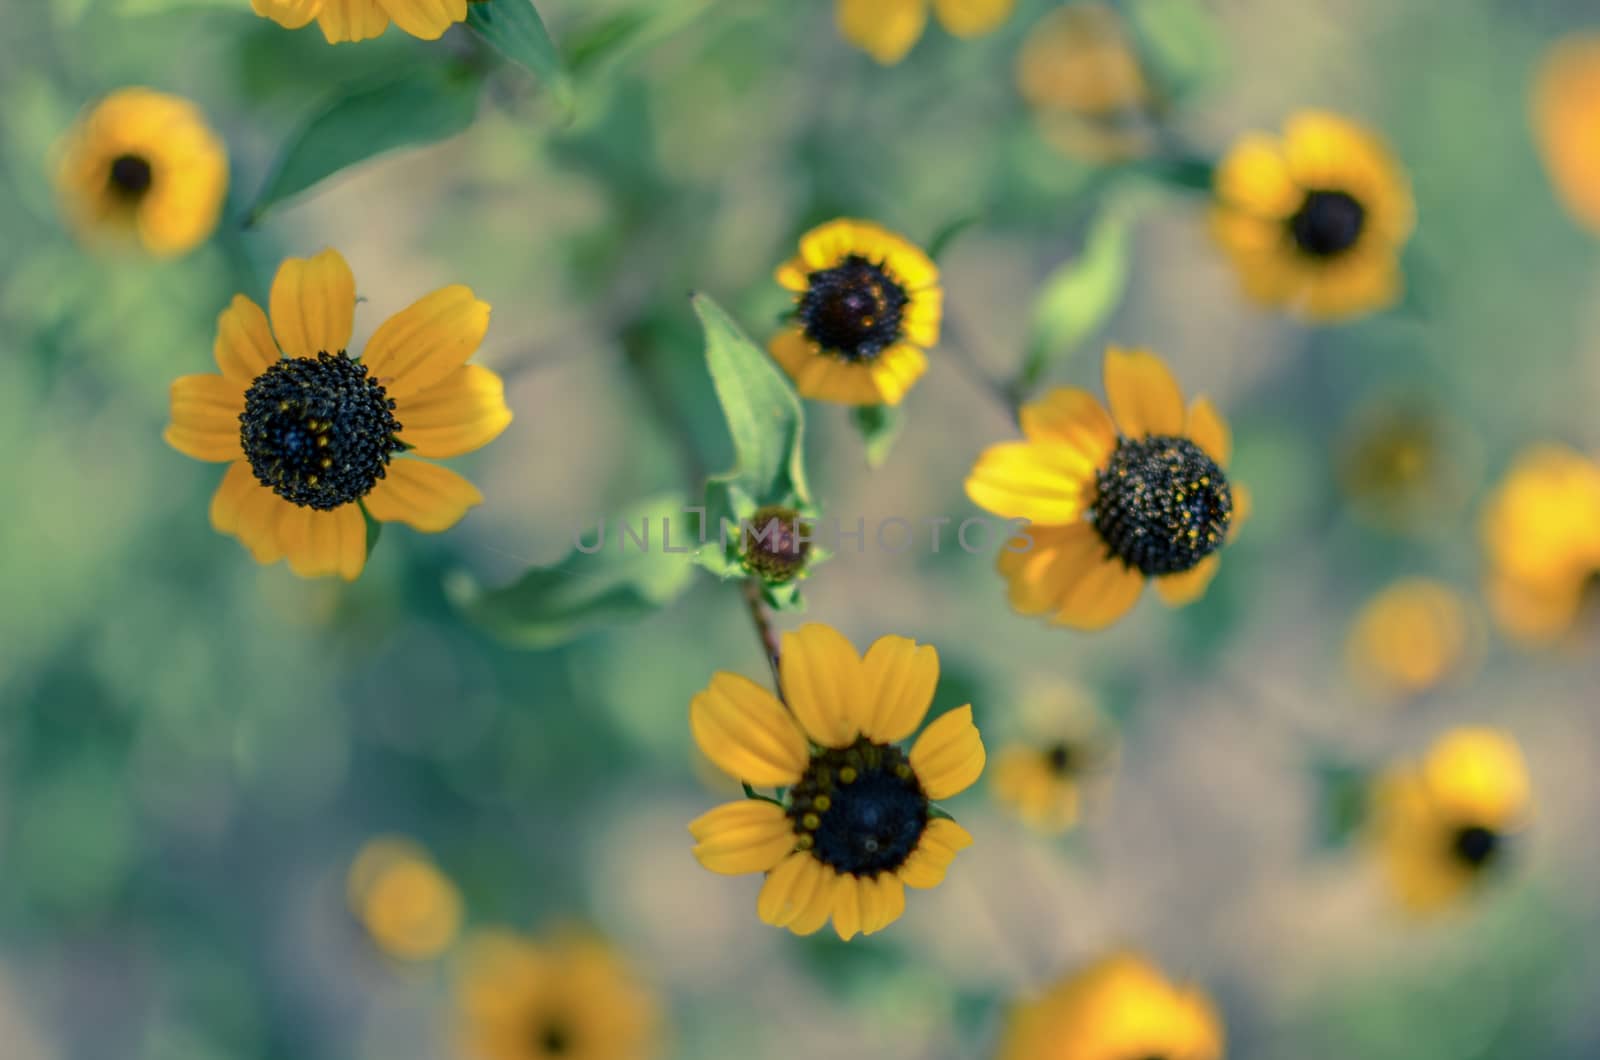 Rudbeckia Hirta L. Toto, Black-Eyed Susan flowers of the Asteraceae family background